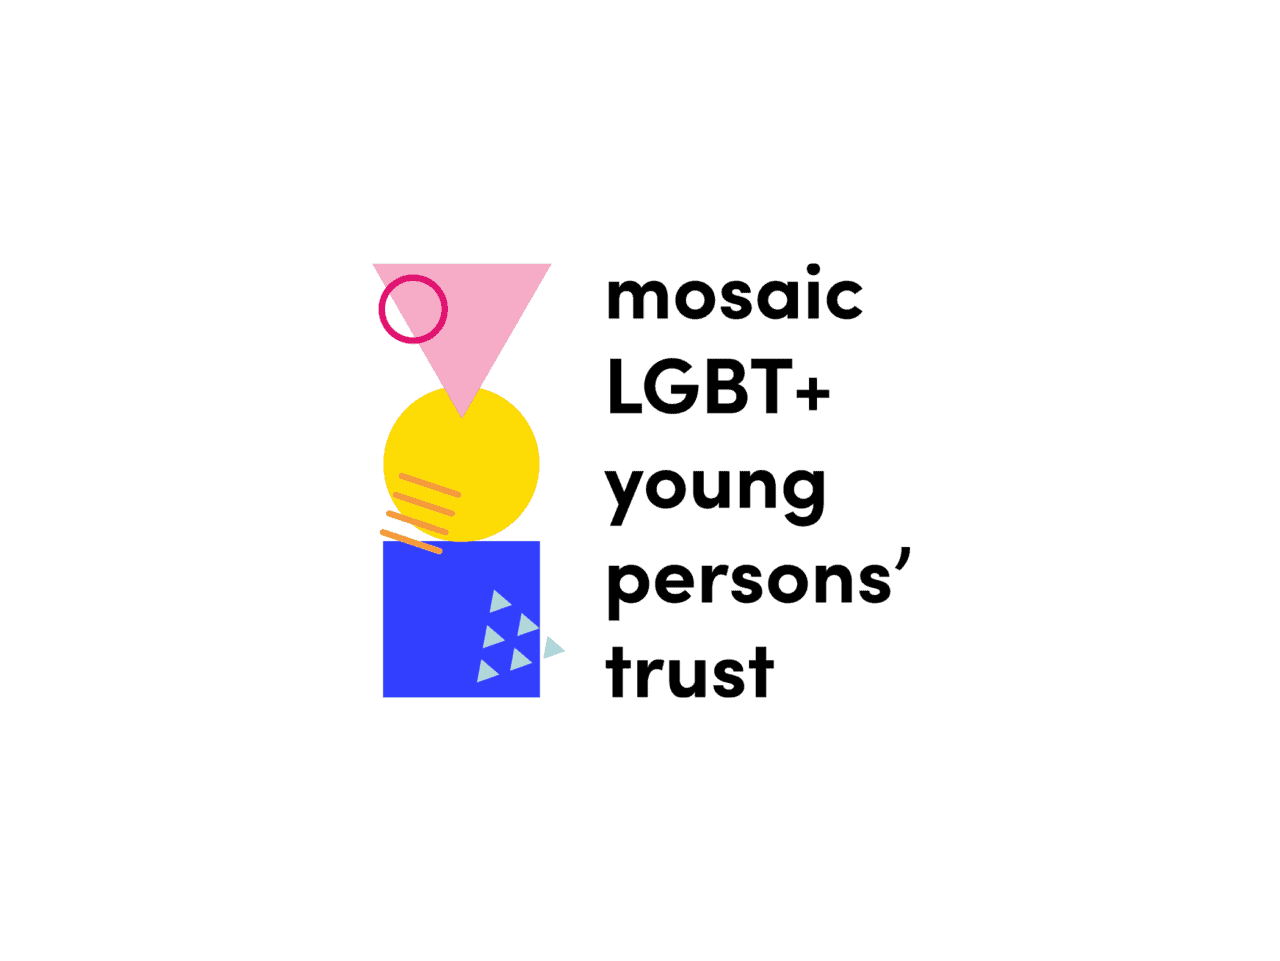 Pink triangle at the top, yellow circle under it and blue square at the bottom with Mosaic LGBT+ Young Person's Trust written next to them.